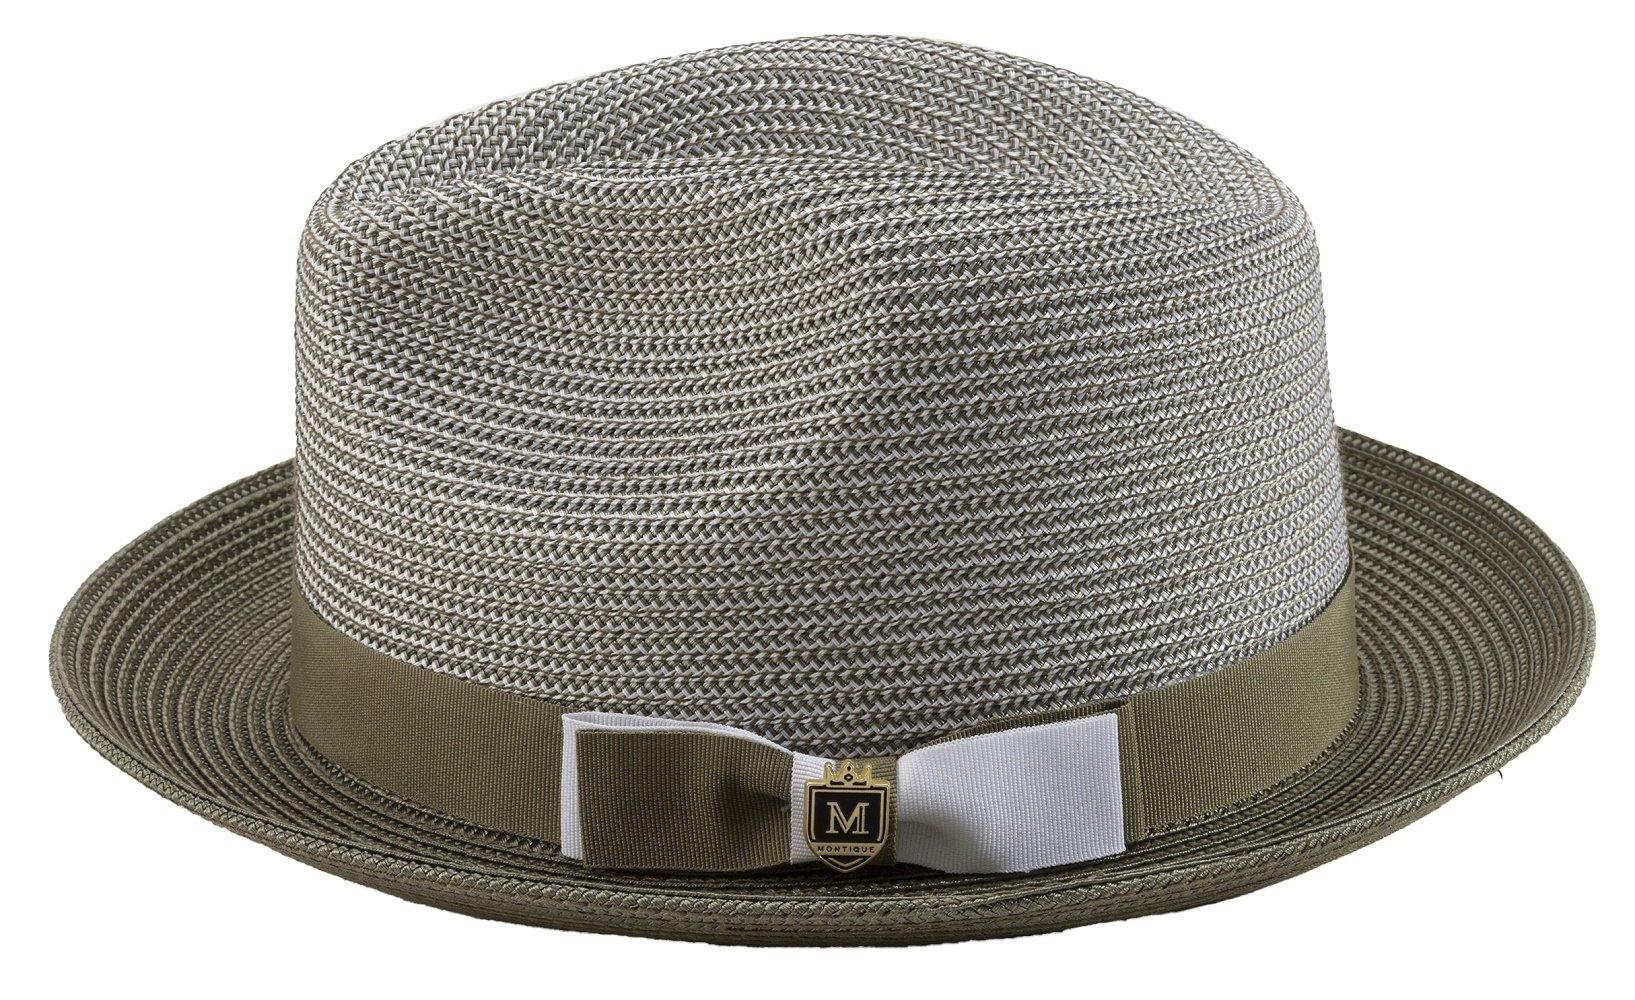 Men's Braided Two Tone Stingy Brim Pinch Fedora Hat in Olive H-68 - Suits & More